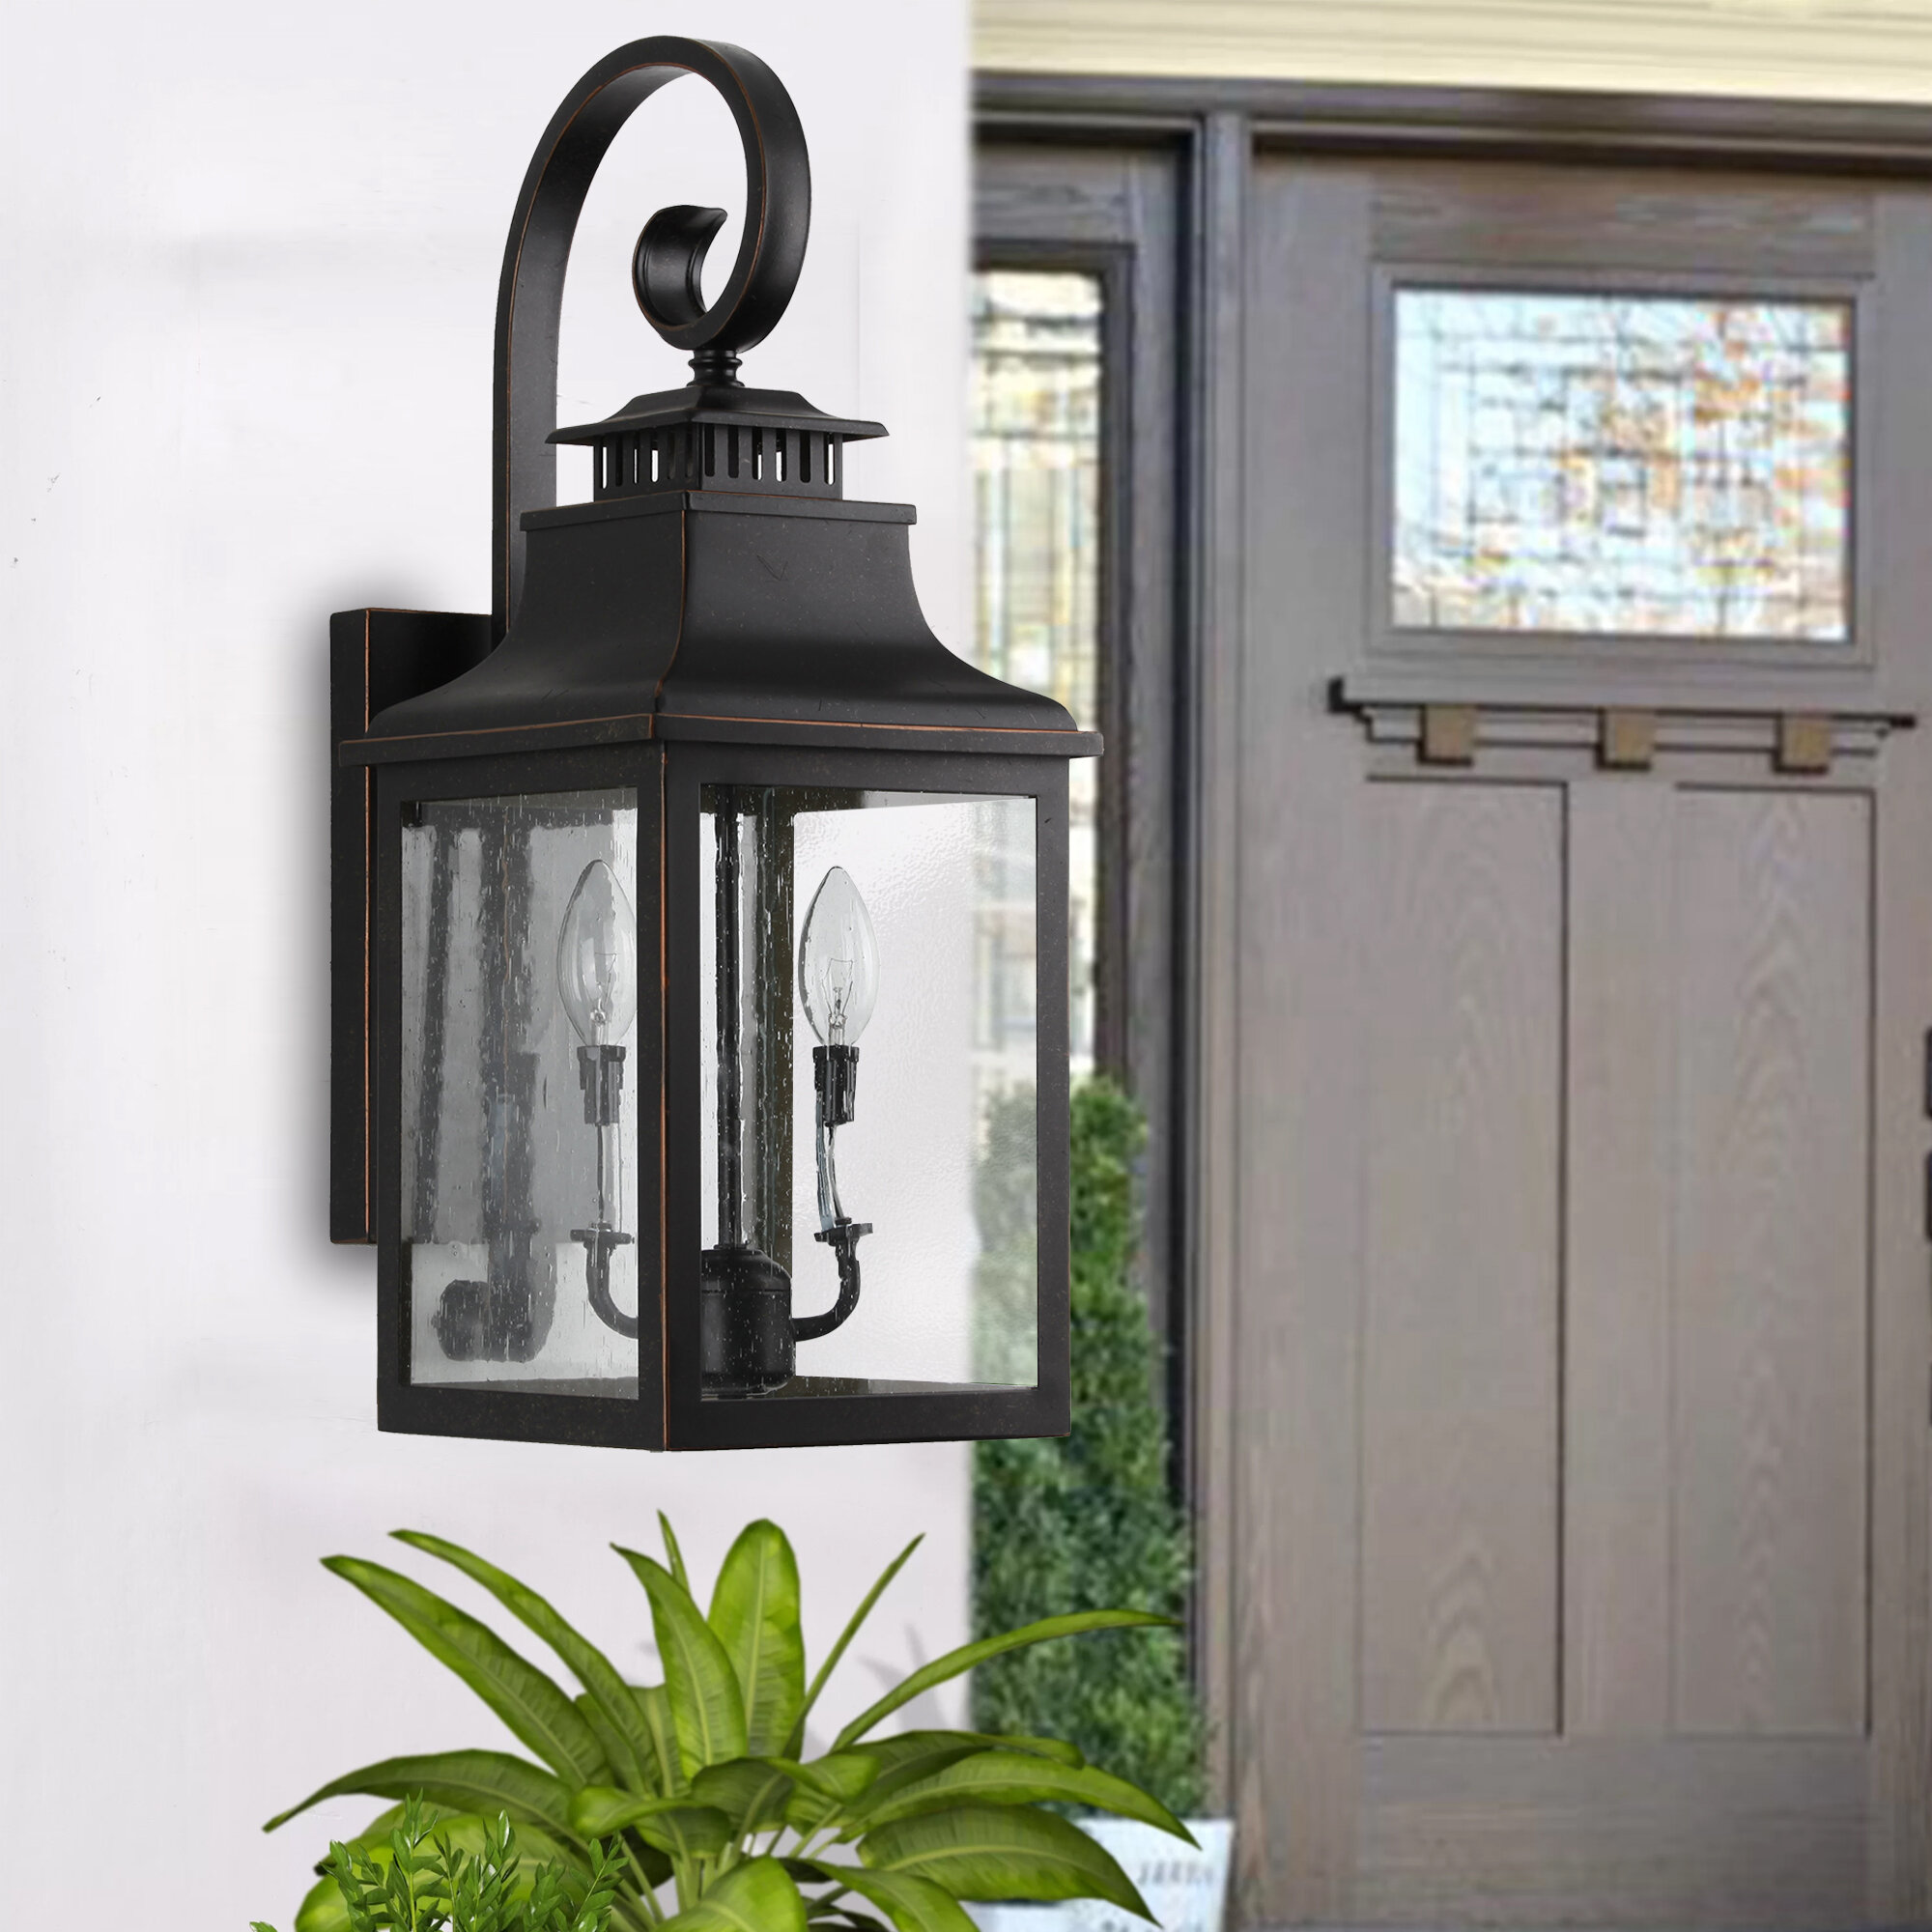 Exterior Sconce Seeded Glass Oil Rubbed Bronze Outdoor Wall Mount Lantern Light 